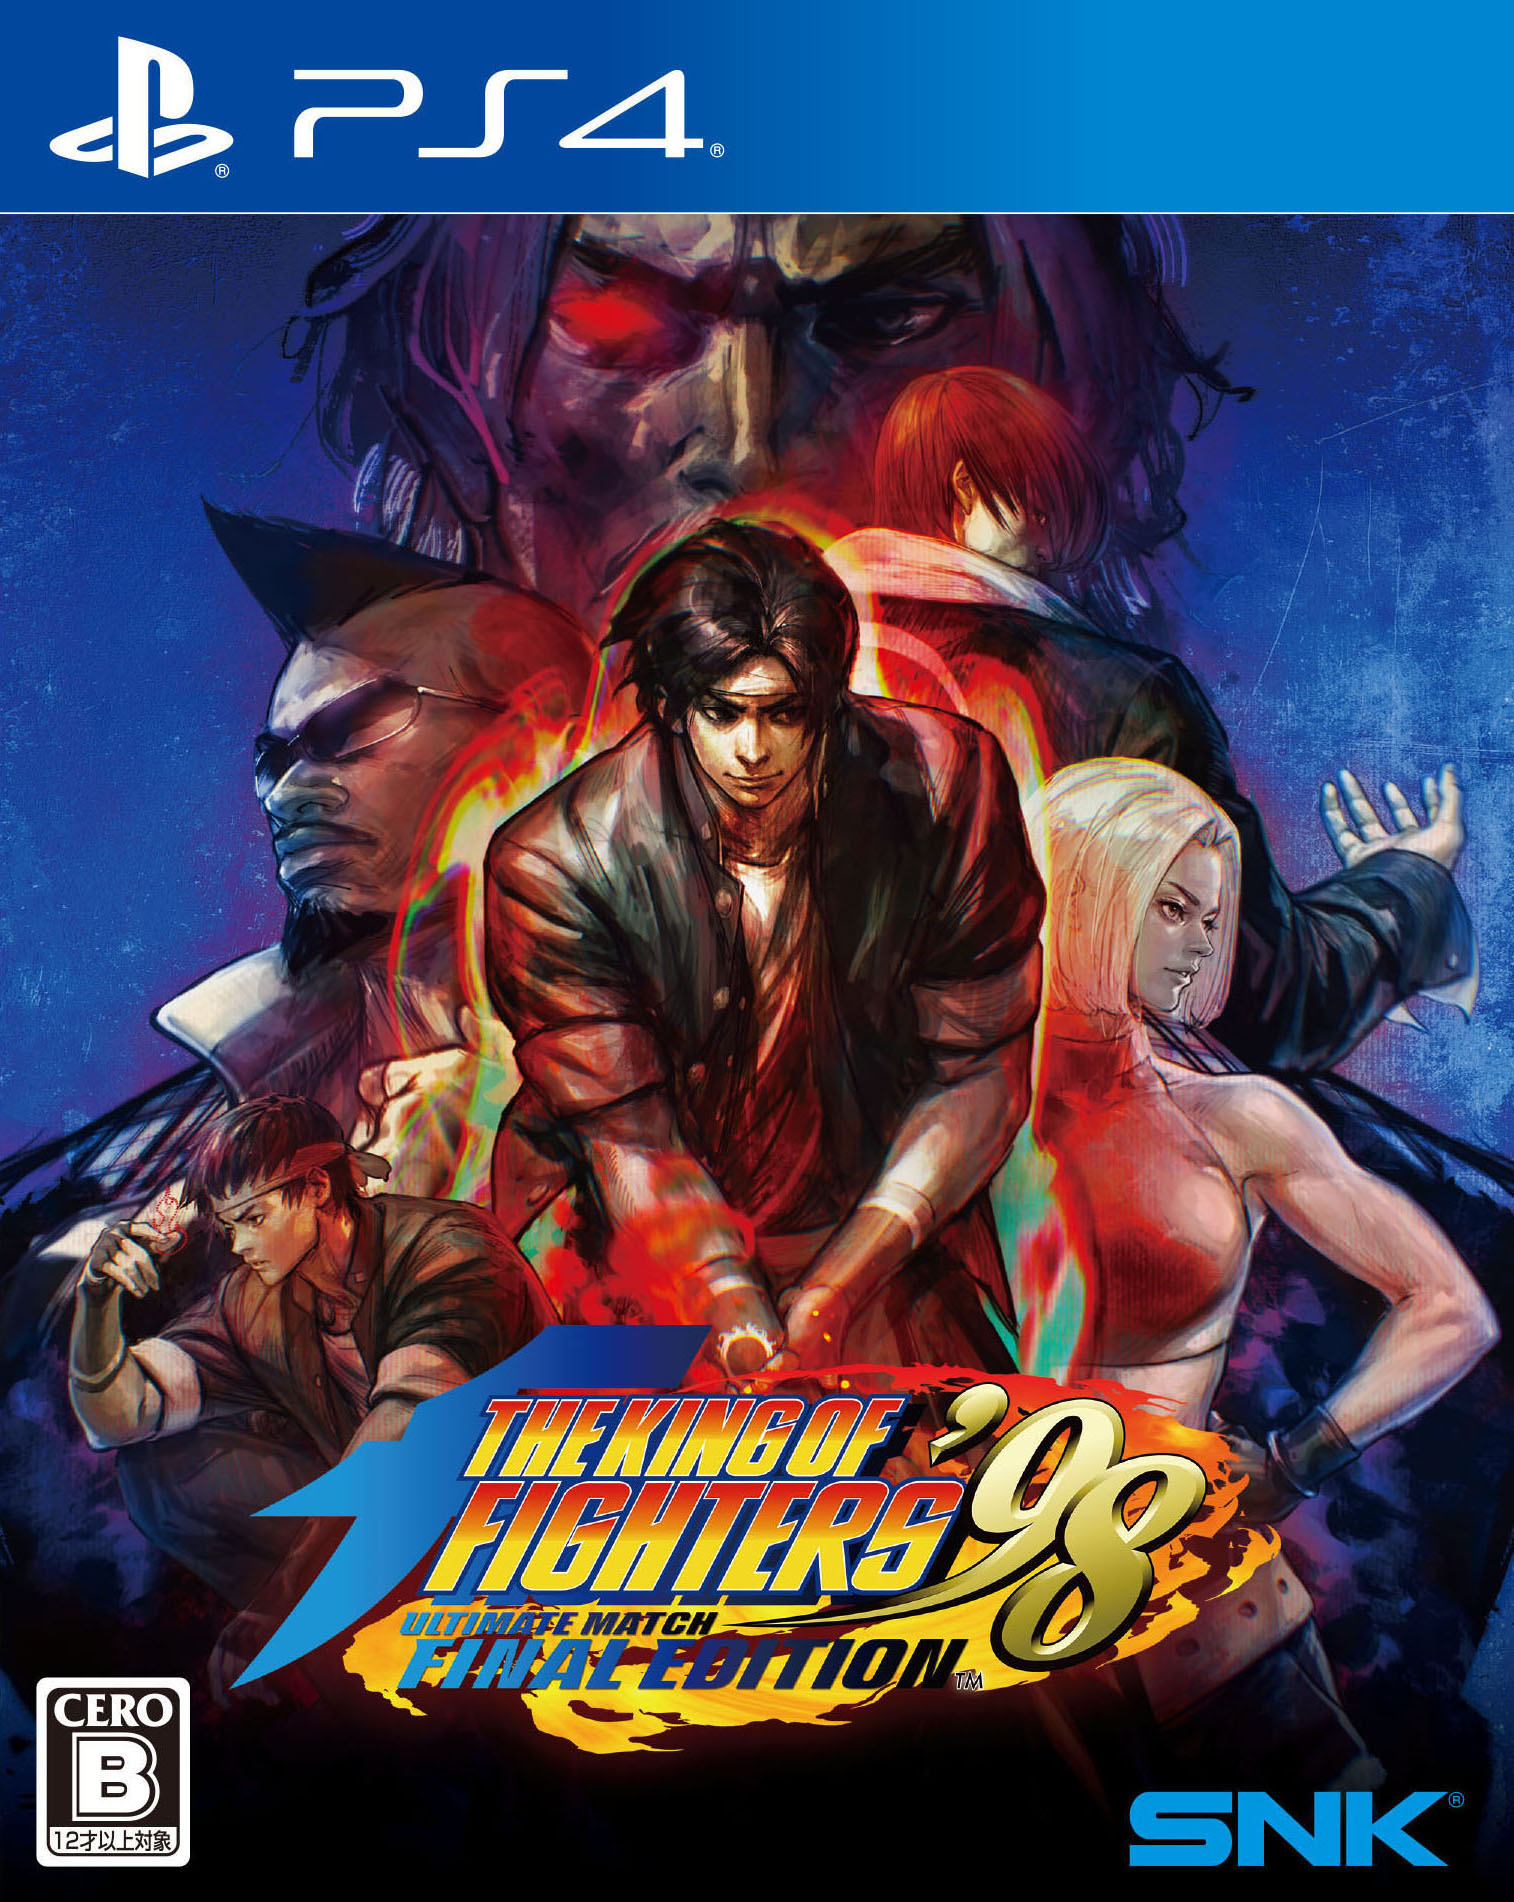 THE KING OF FIGHTERS ’98 ULTIMATE MATCH FINAL EDITION<br>ソフト:プレイステーション4ソフト／アクション・ゲーム